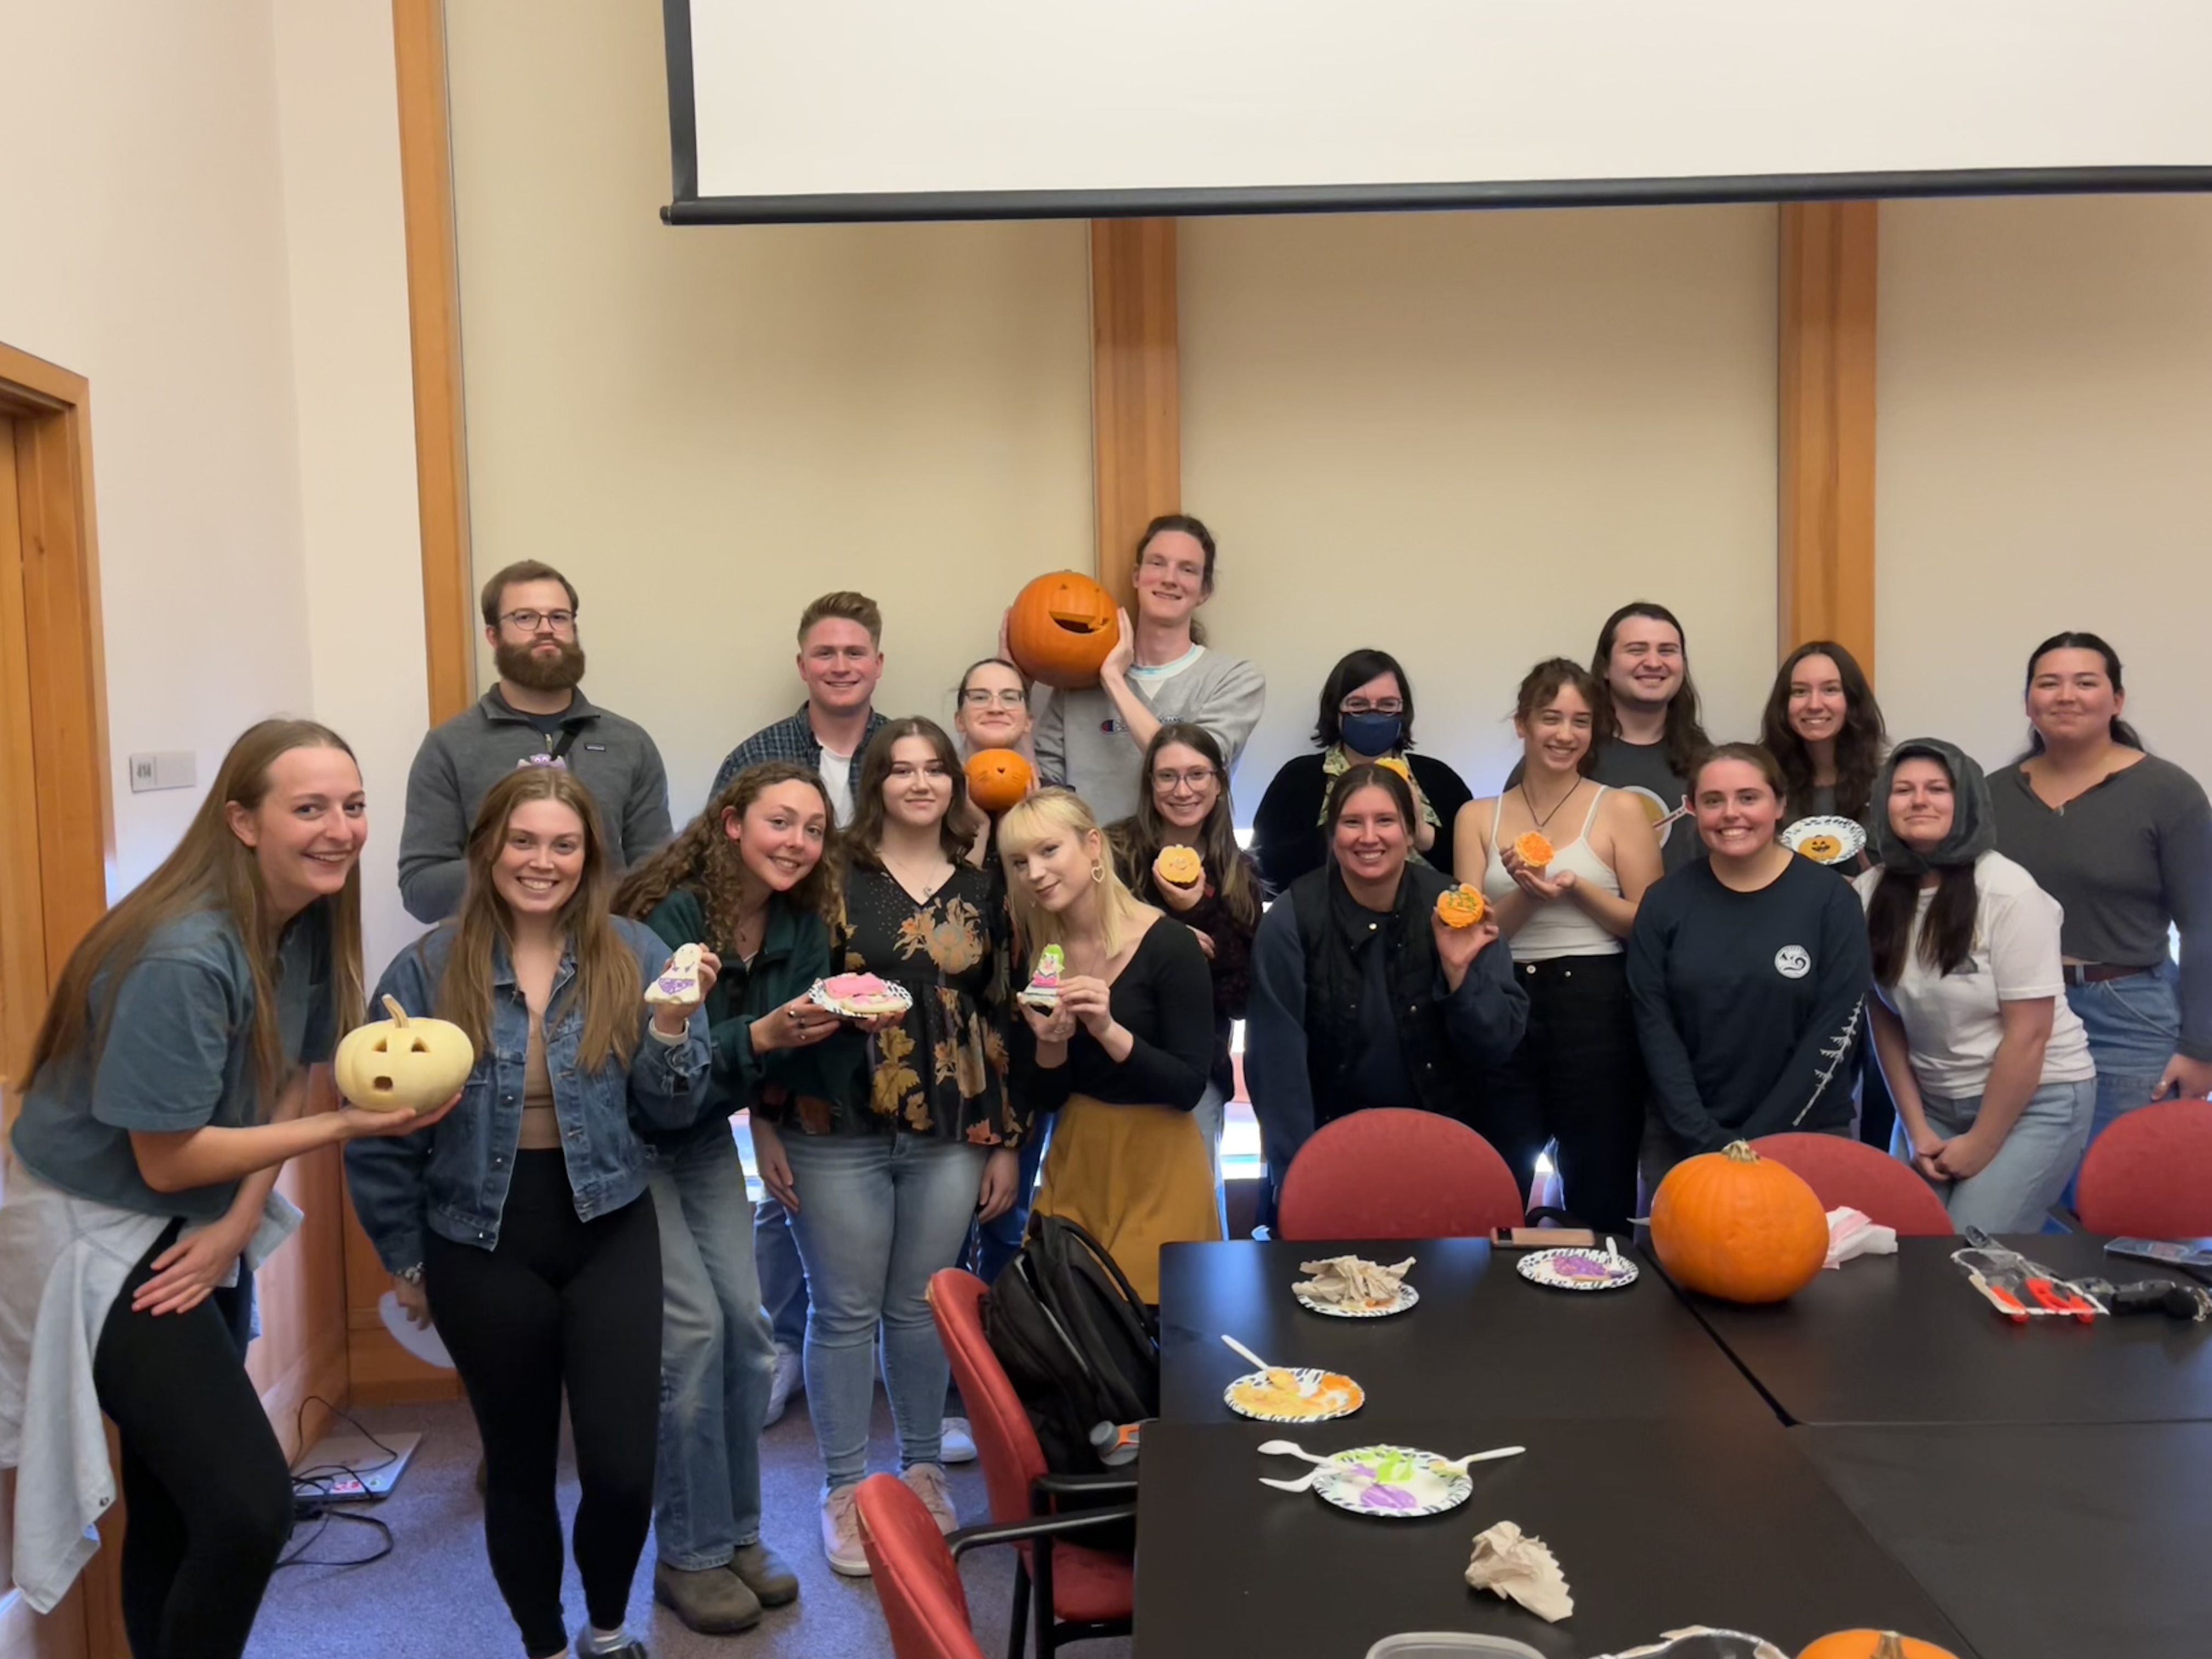 Large group of students in a meeting room hold pumpkins that have been carved and cookies that have been decorated at a celebration.